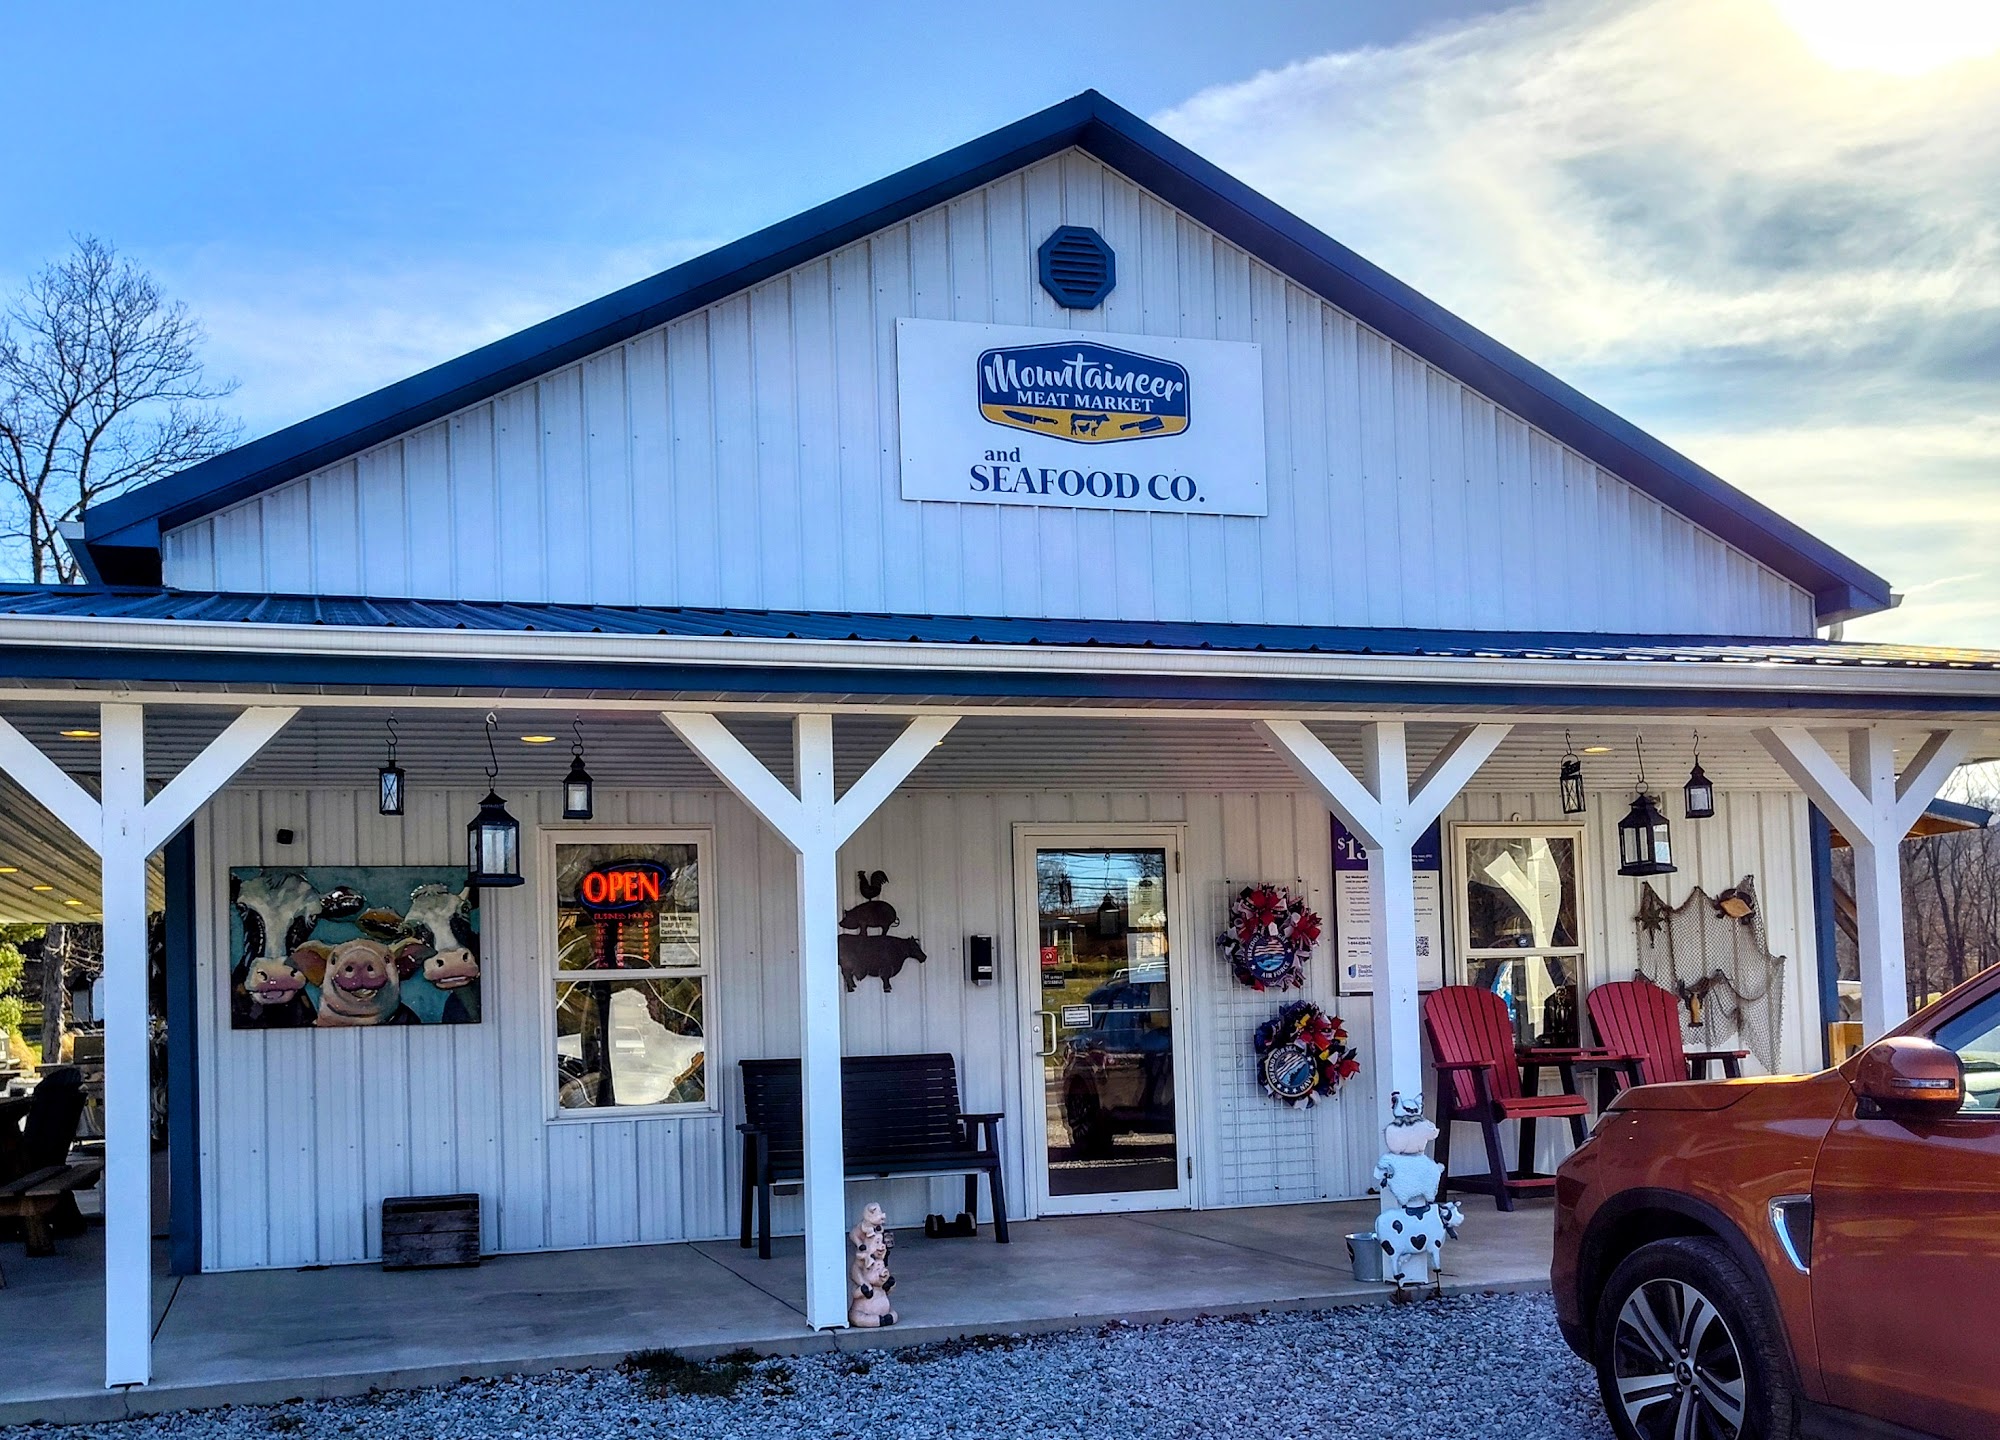 Mountaineer Meat Market and Seafood Co.